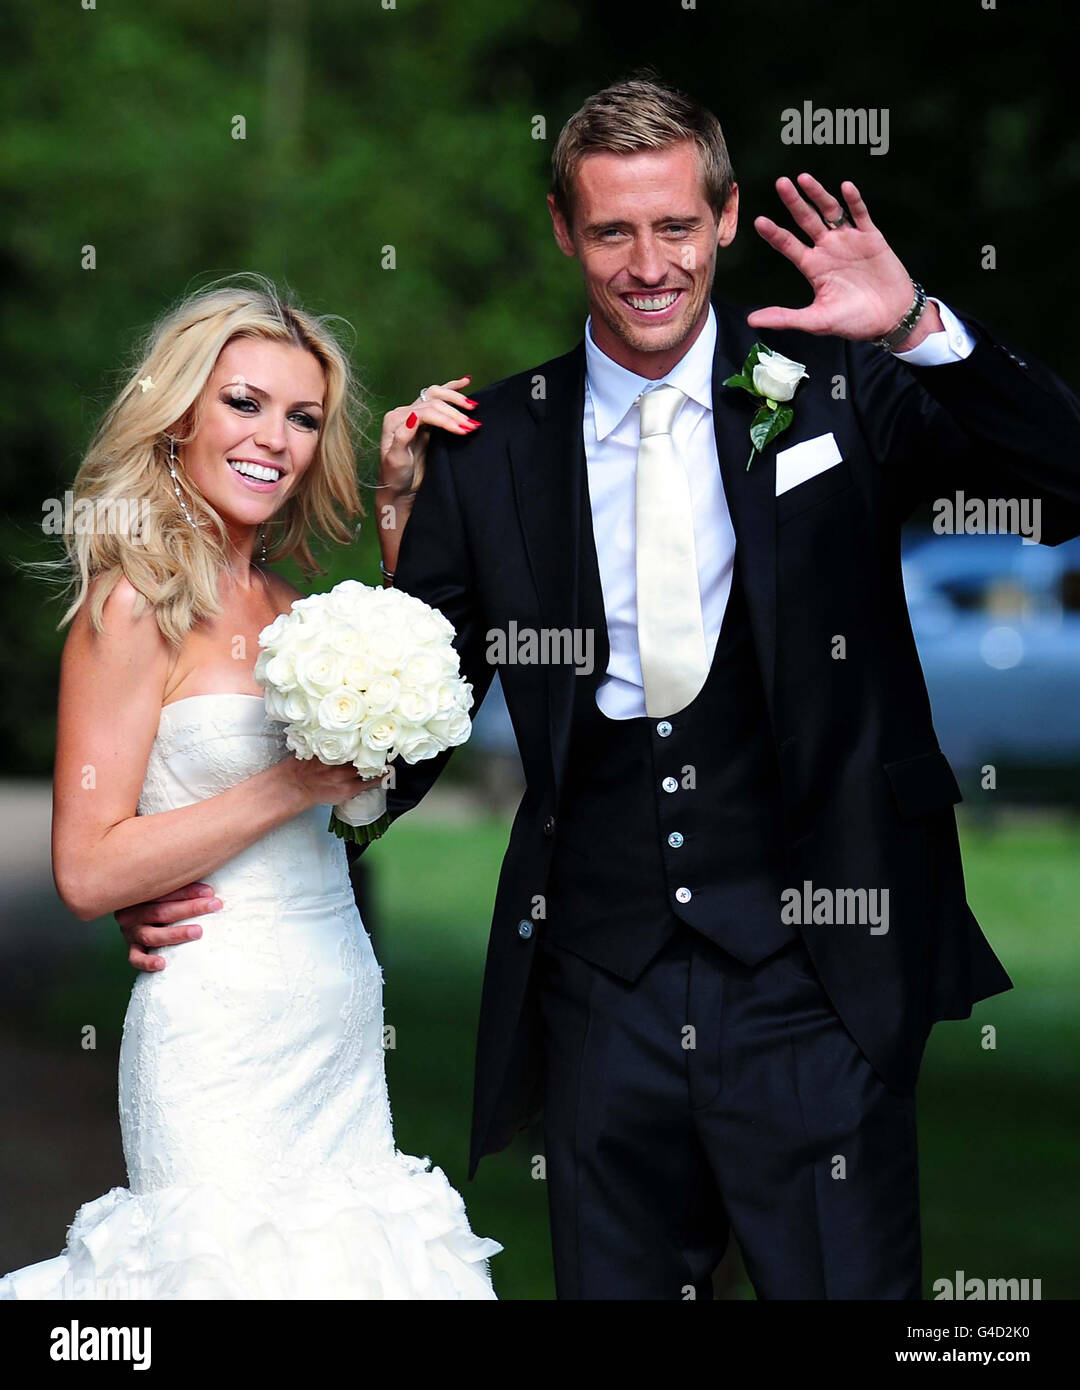 Footballer peter crouch and model abbey clancy in the grounds of ...